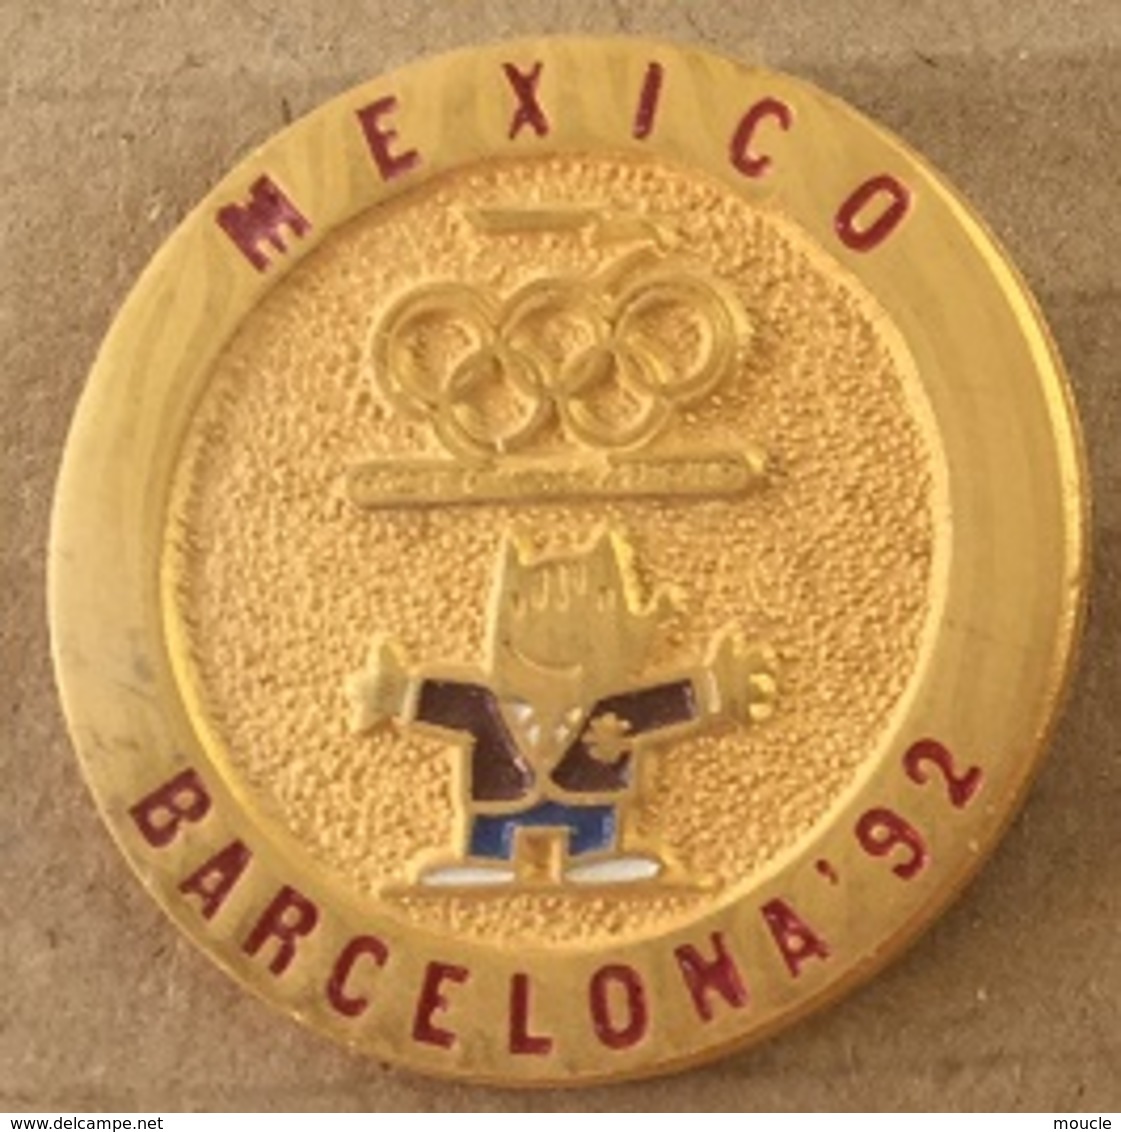 JEUX OLYMPIQUES - BARCELONA'92 - TEAM OF MEXICO - COMITE OLYMPIC - MEXIQUE - ESPAGNE - SPAIN  -    (20) - Giochi Olimpici